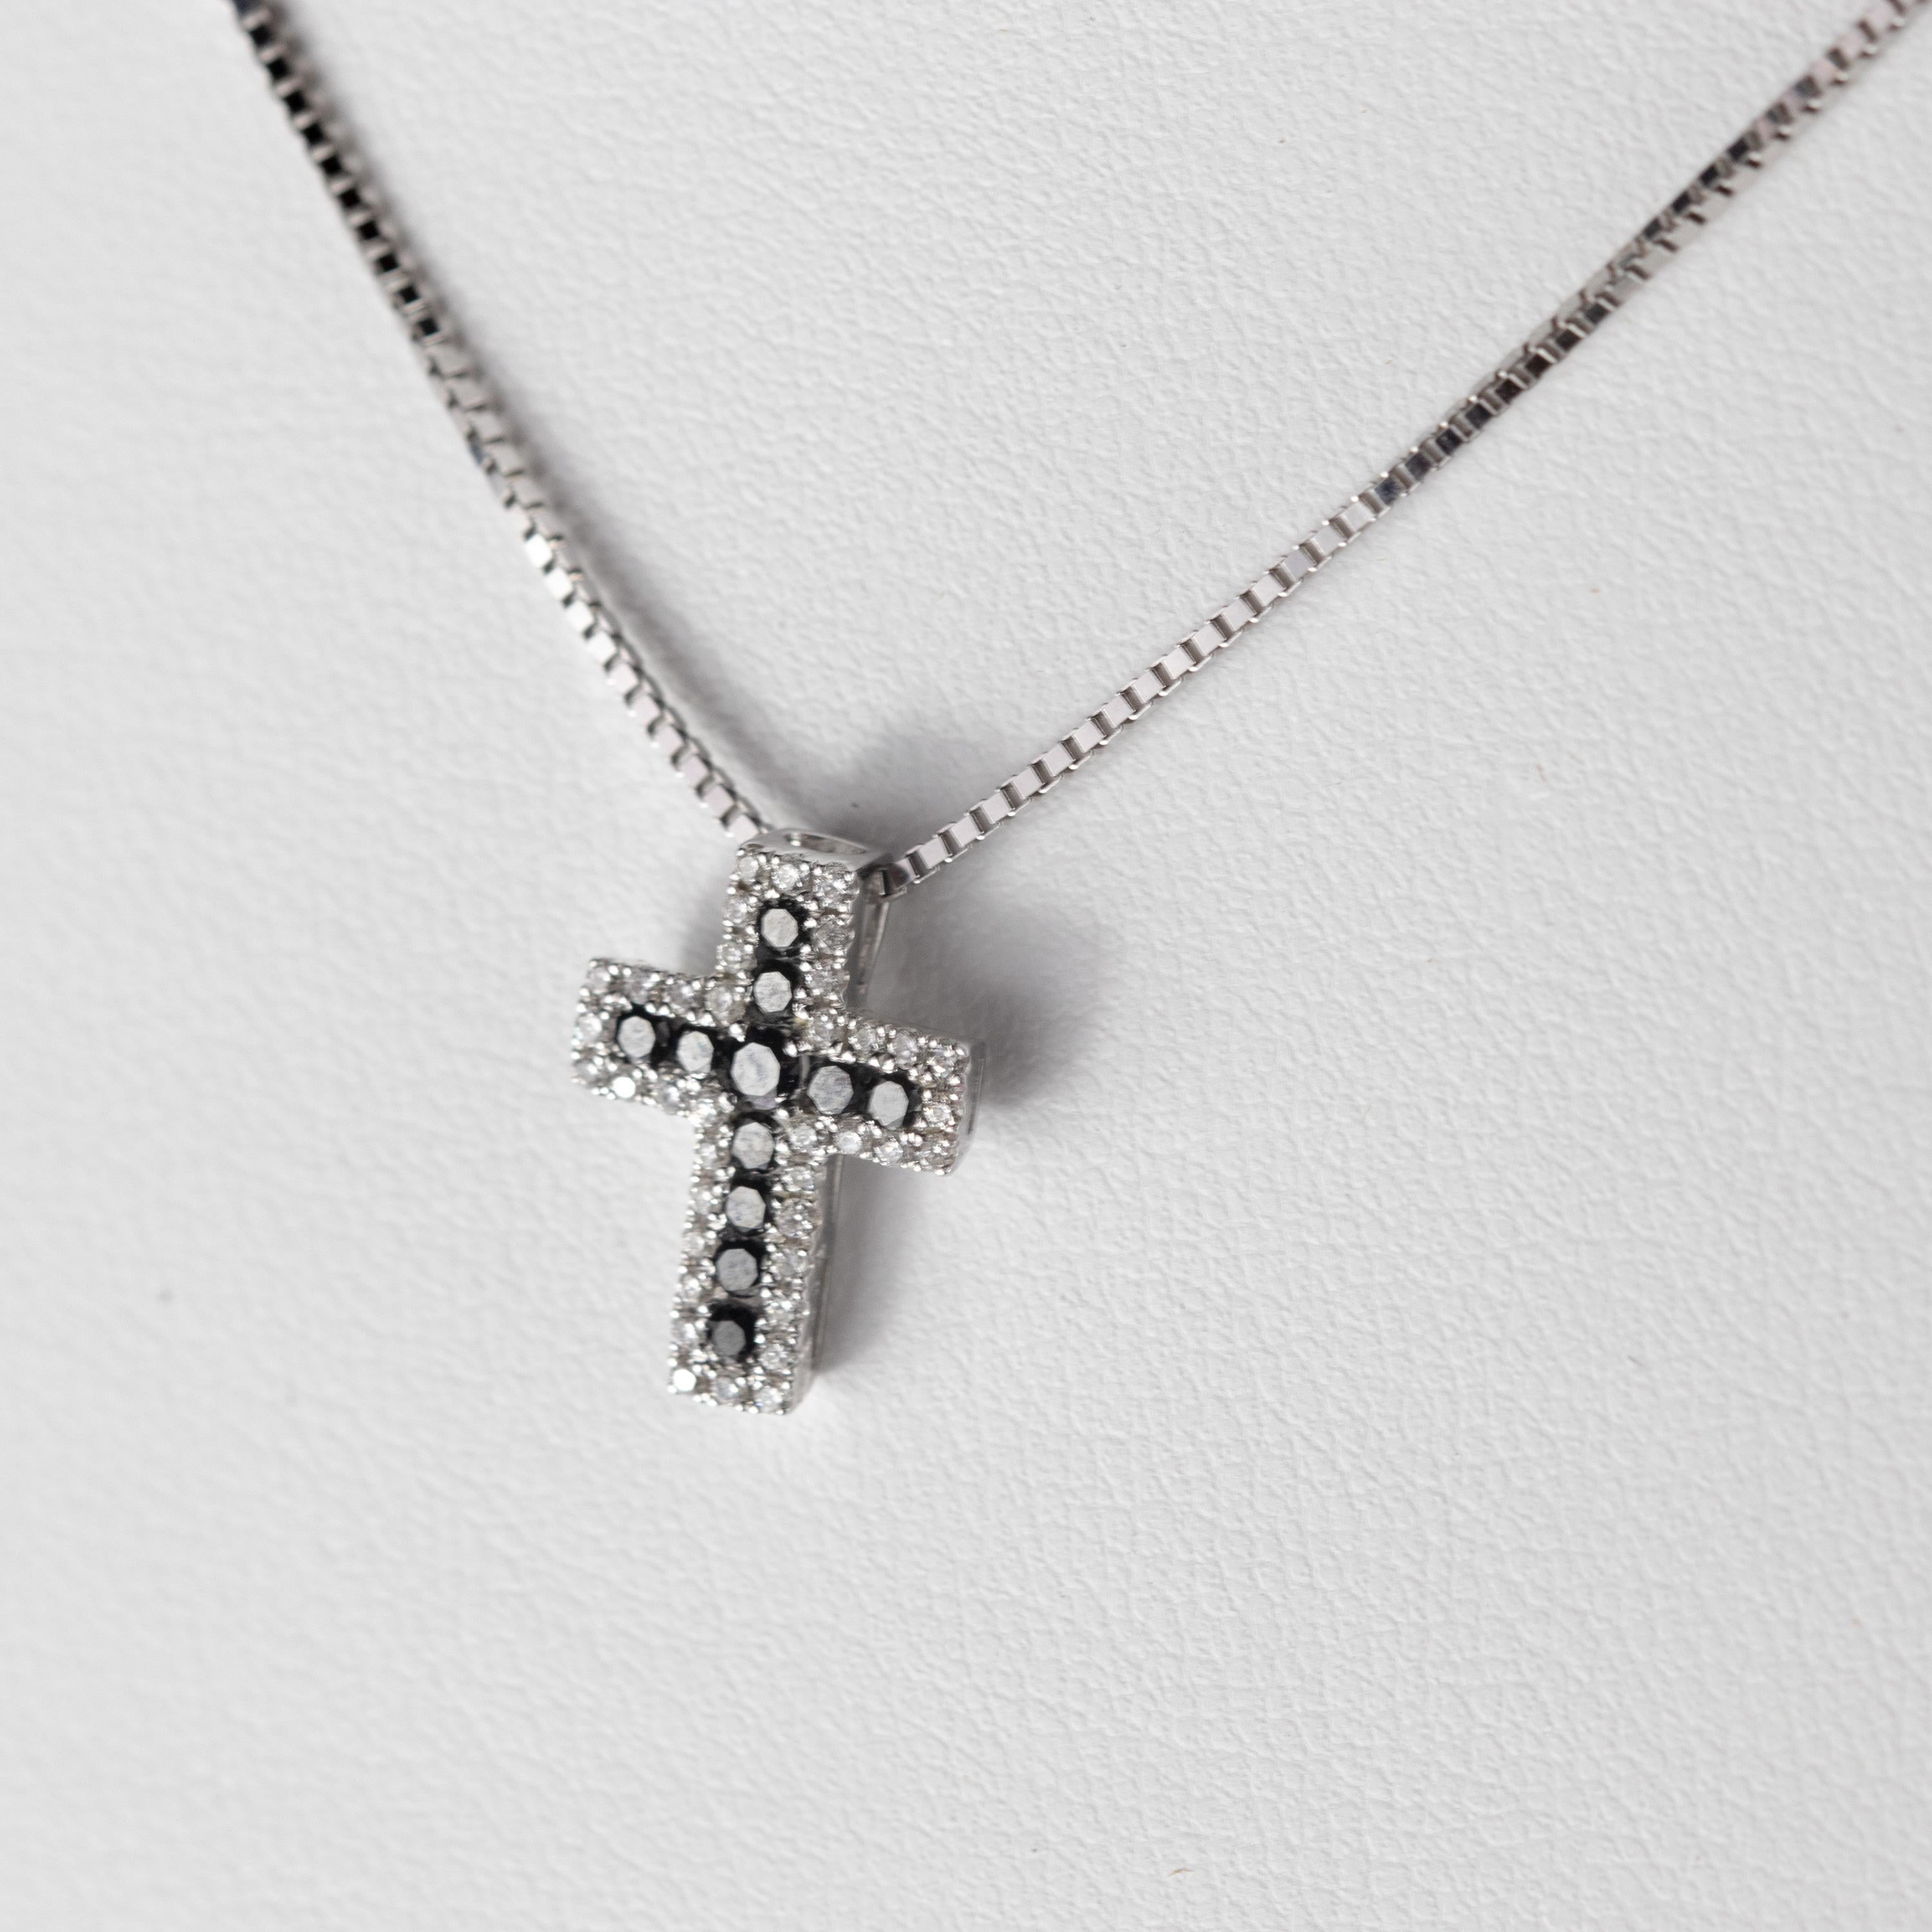 Splendid and stunning delicate cross pendant made of more than 30 white diamonds and 10 black diamonds. Marvelous design that creates a unique pendant full of light and glamour. Holded by a 18 karat white gold 45 cm chain for a chic and vintage